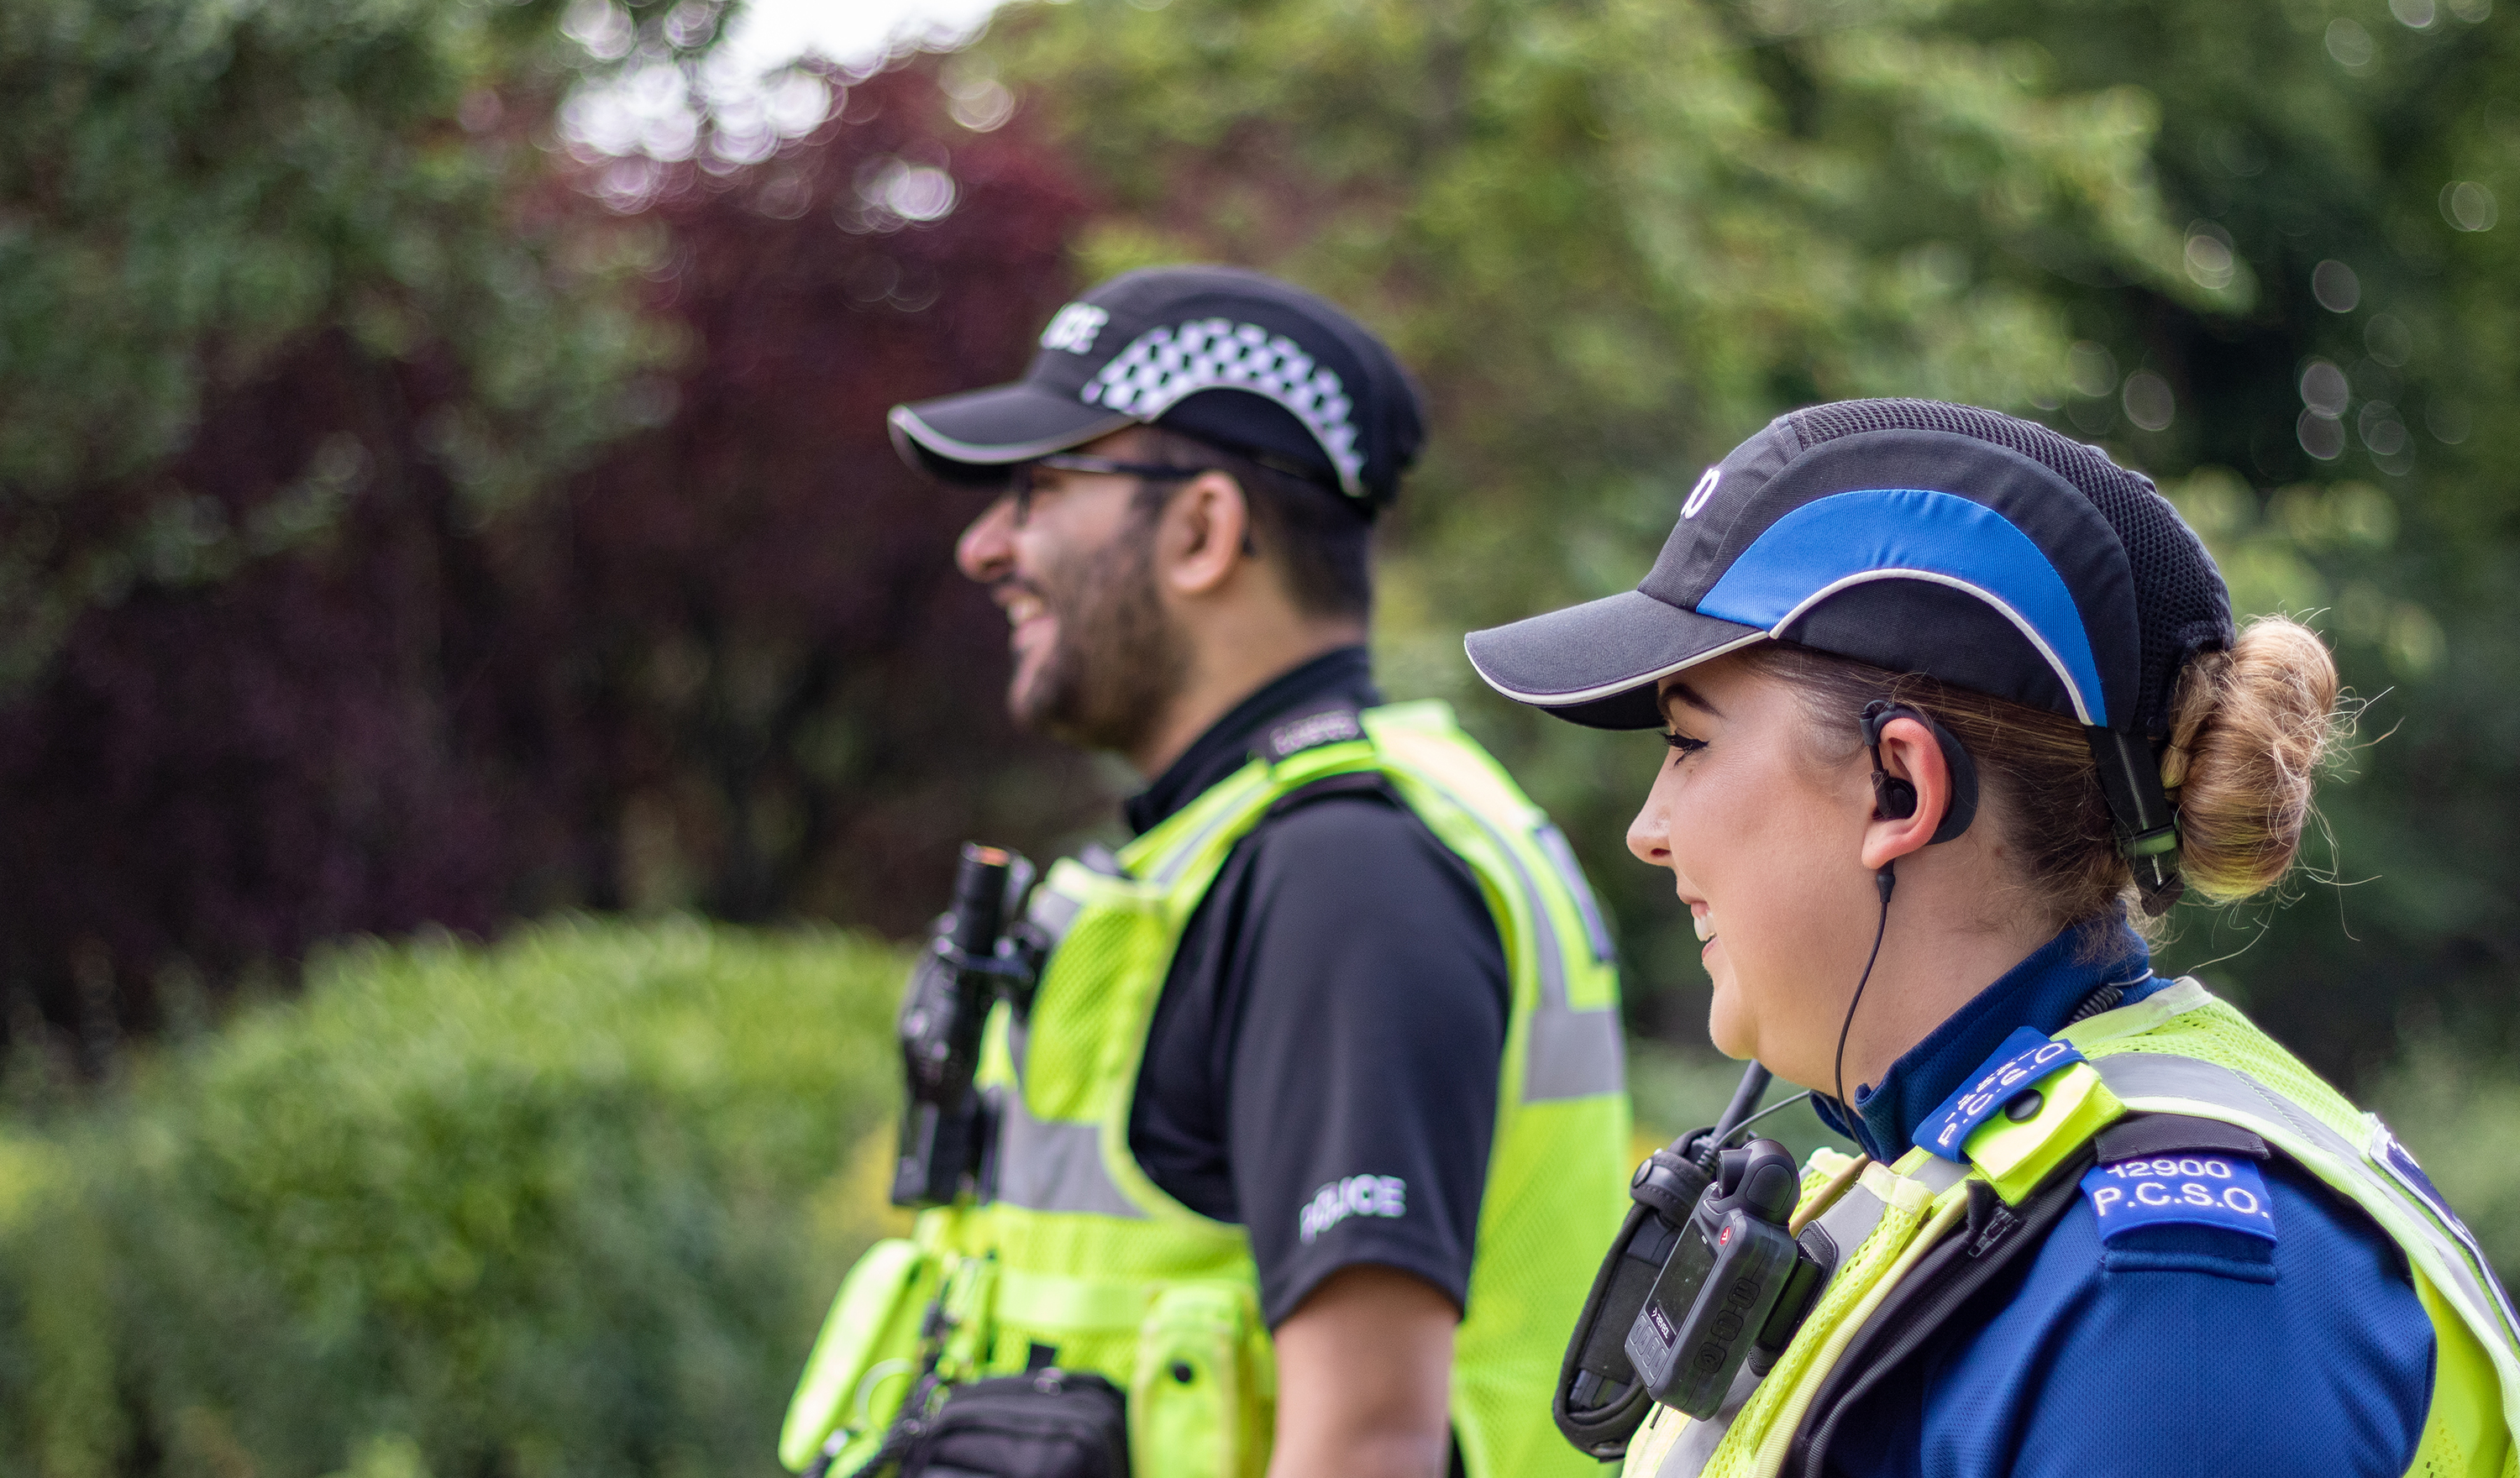 PCSO and PC in park.jpg